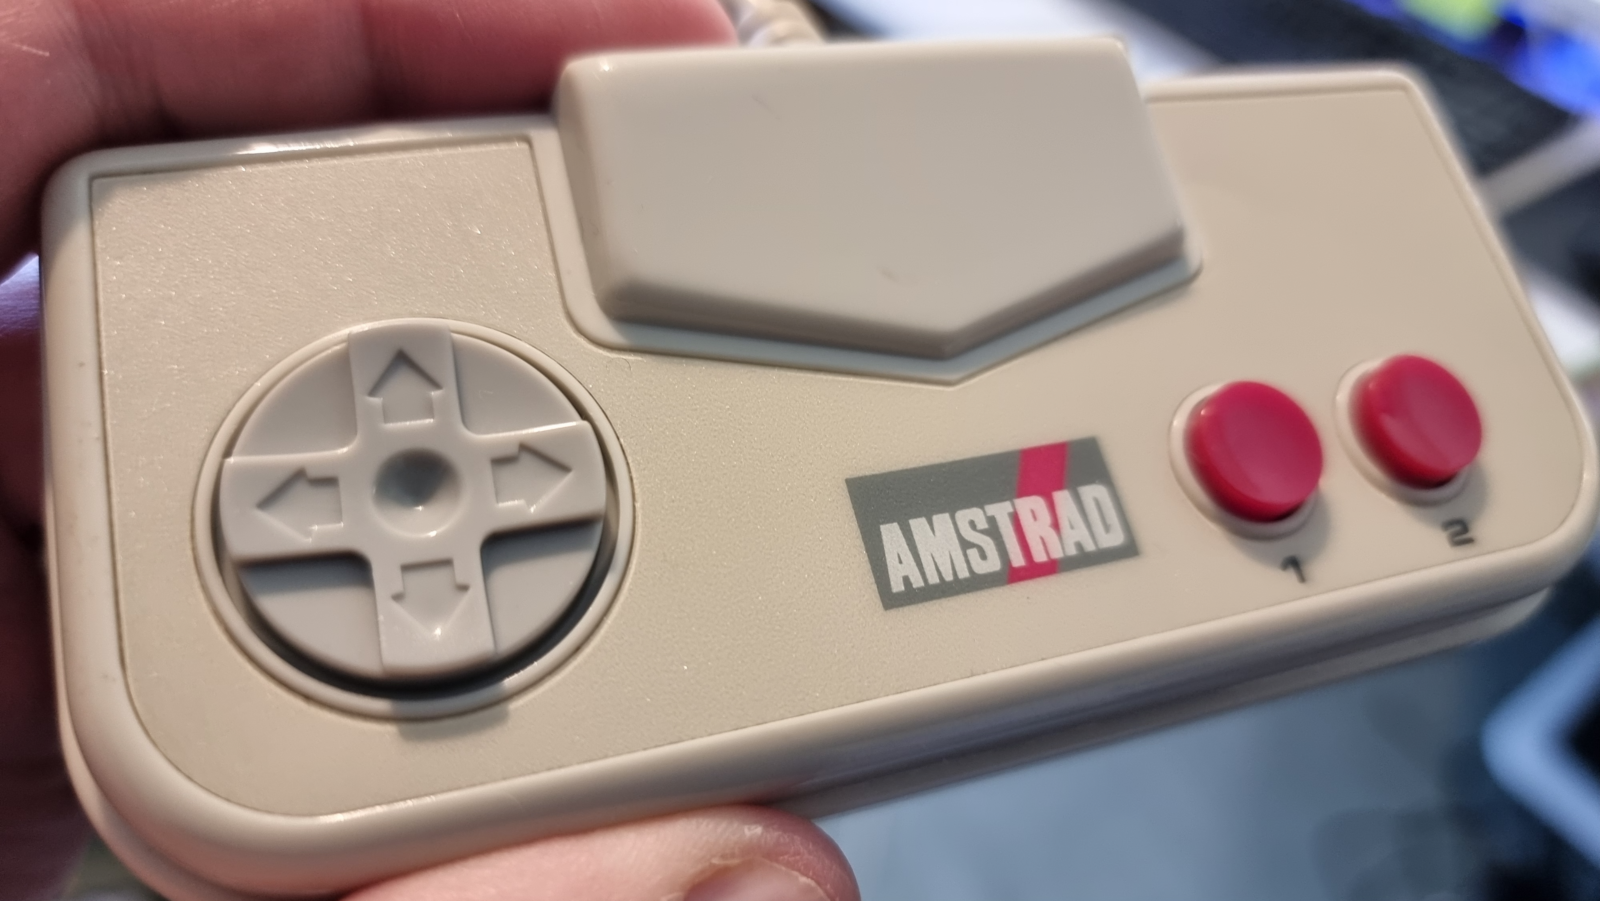 The image displays a close-up of a hand holding a restored and cleaned Amstrad GX4000 game controller. The controller looks in excellent condition with its directional pad, two red buttons, and the Amstrad logo prominently displayed. The restoration appears to have returned the controller to a state close to its original appearance.